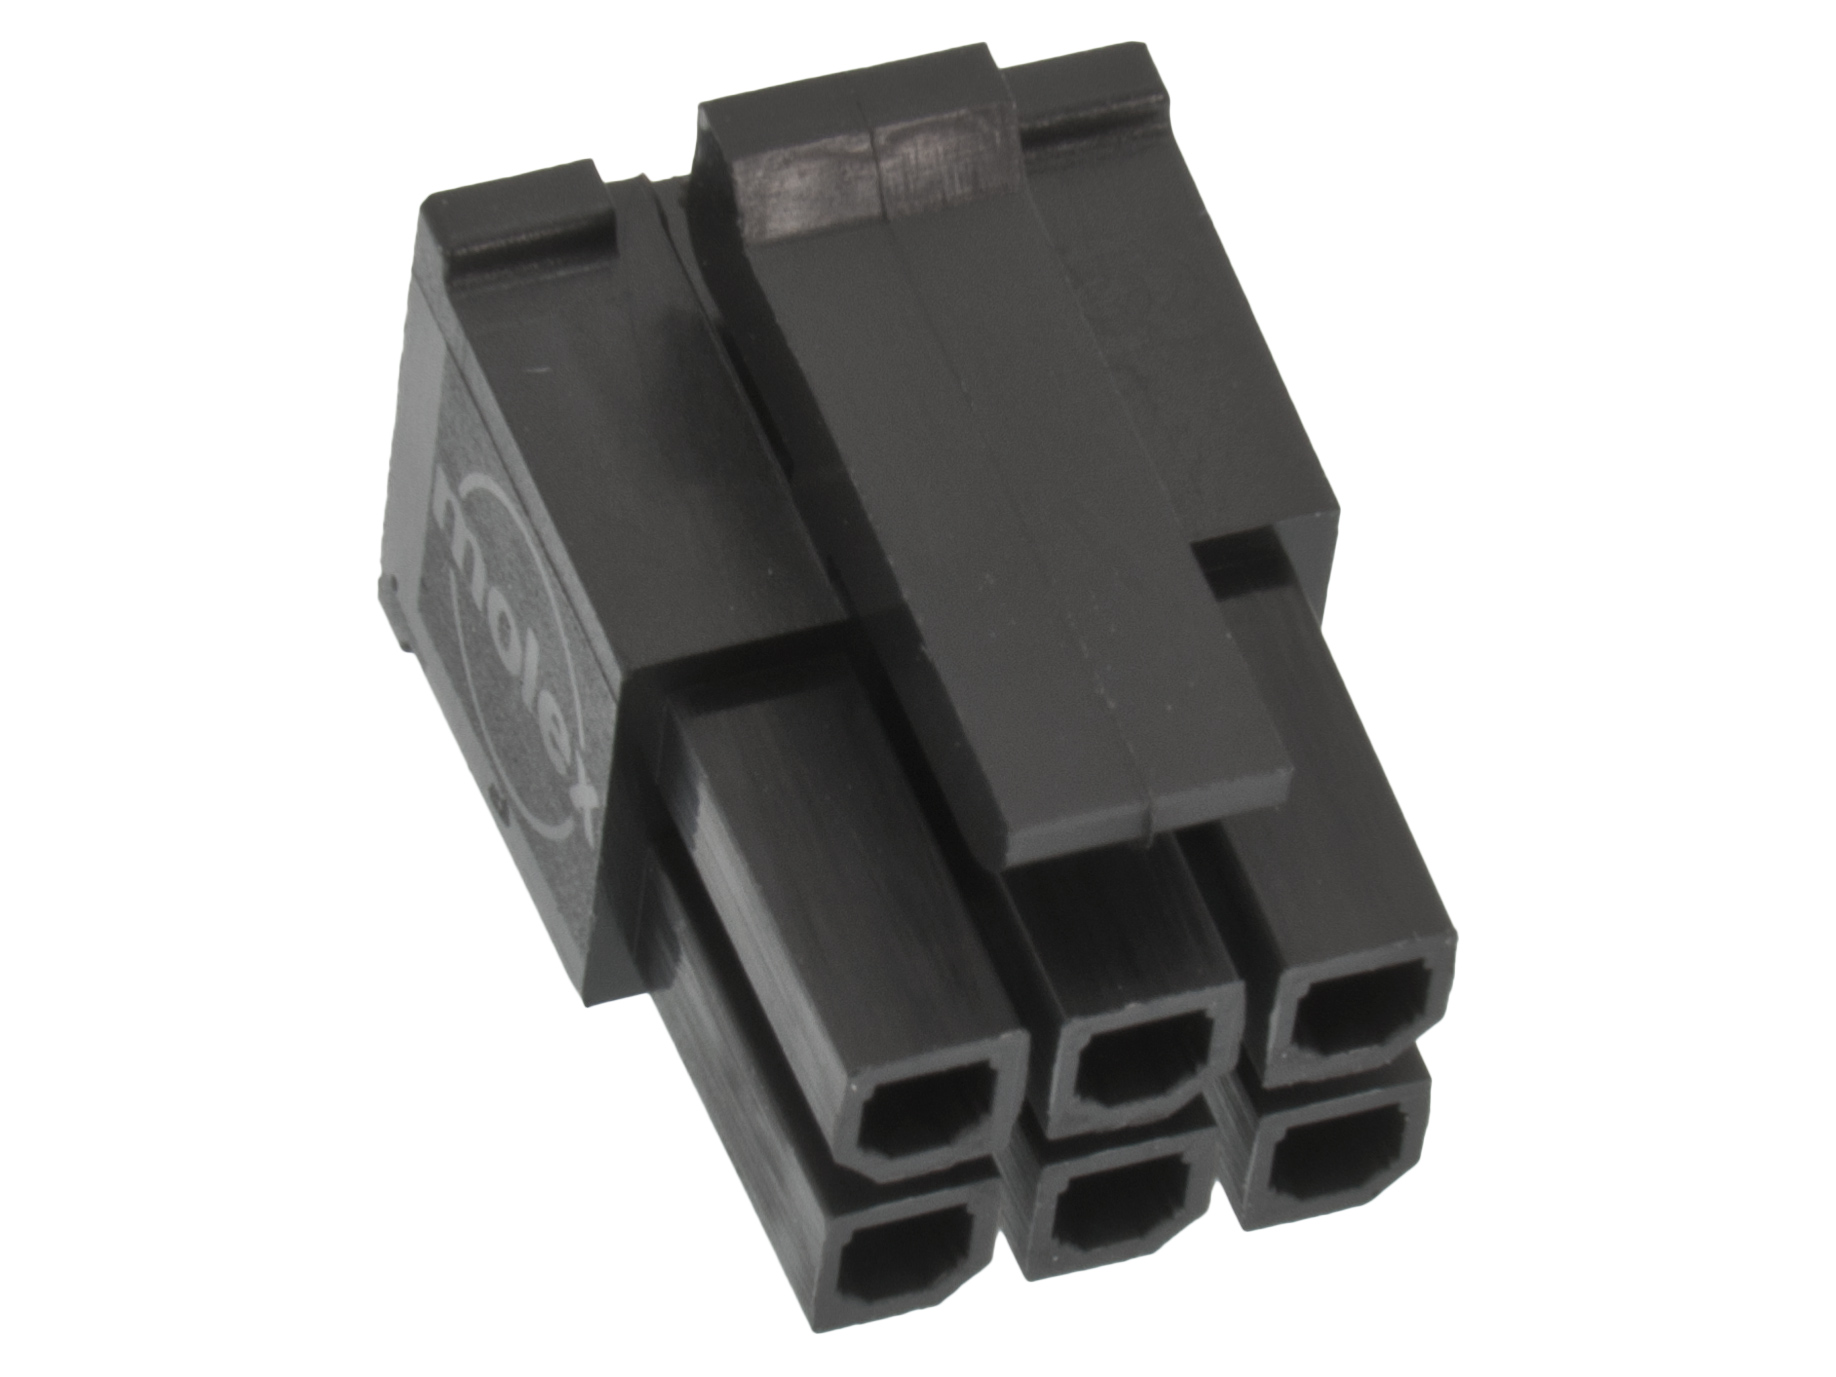 Contact housing Micro-Fit Female 2x3p 3mm @ electrokit